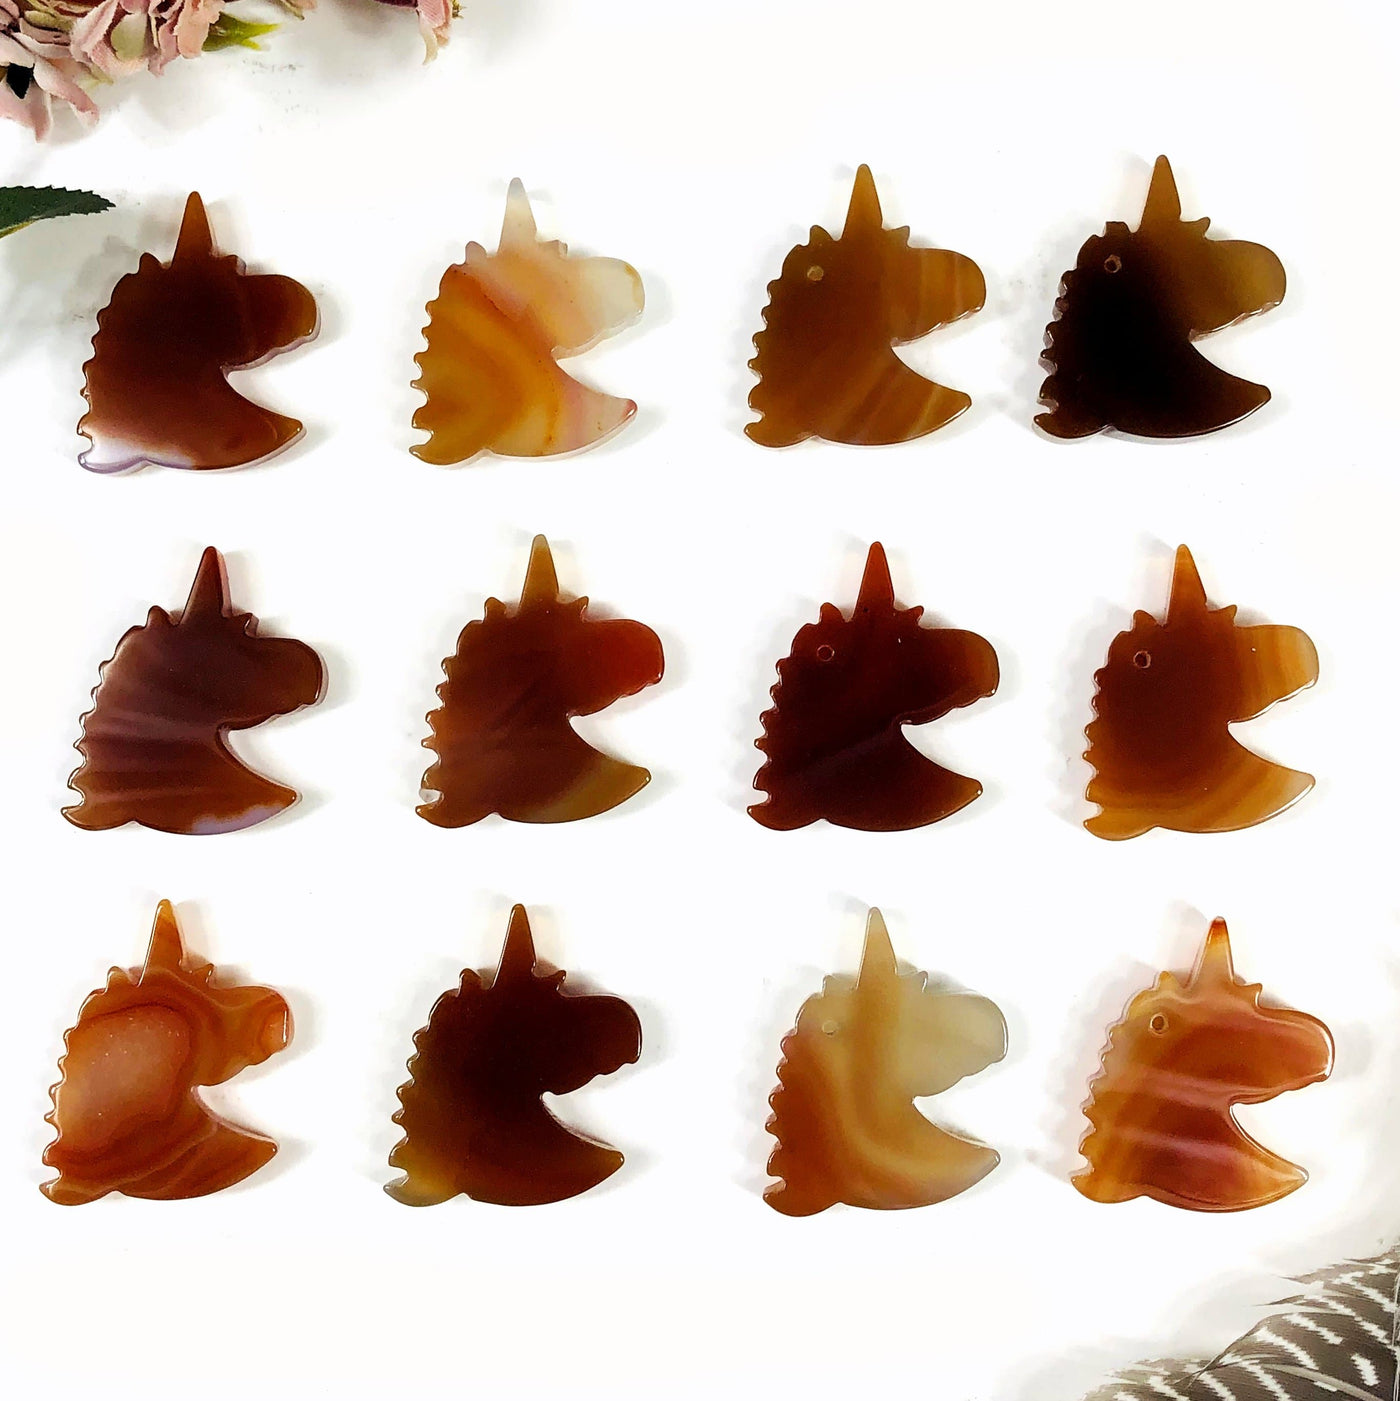 Natural agate unicorn heads being displayed on a white background.